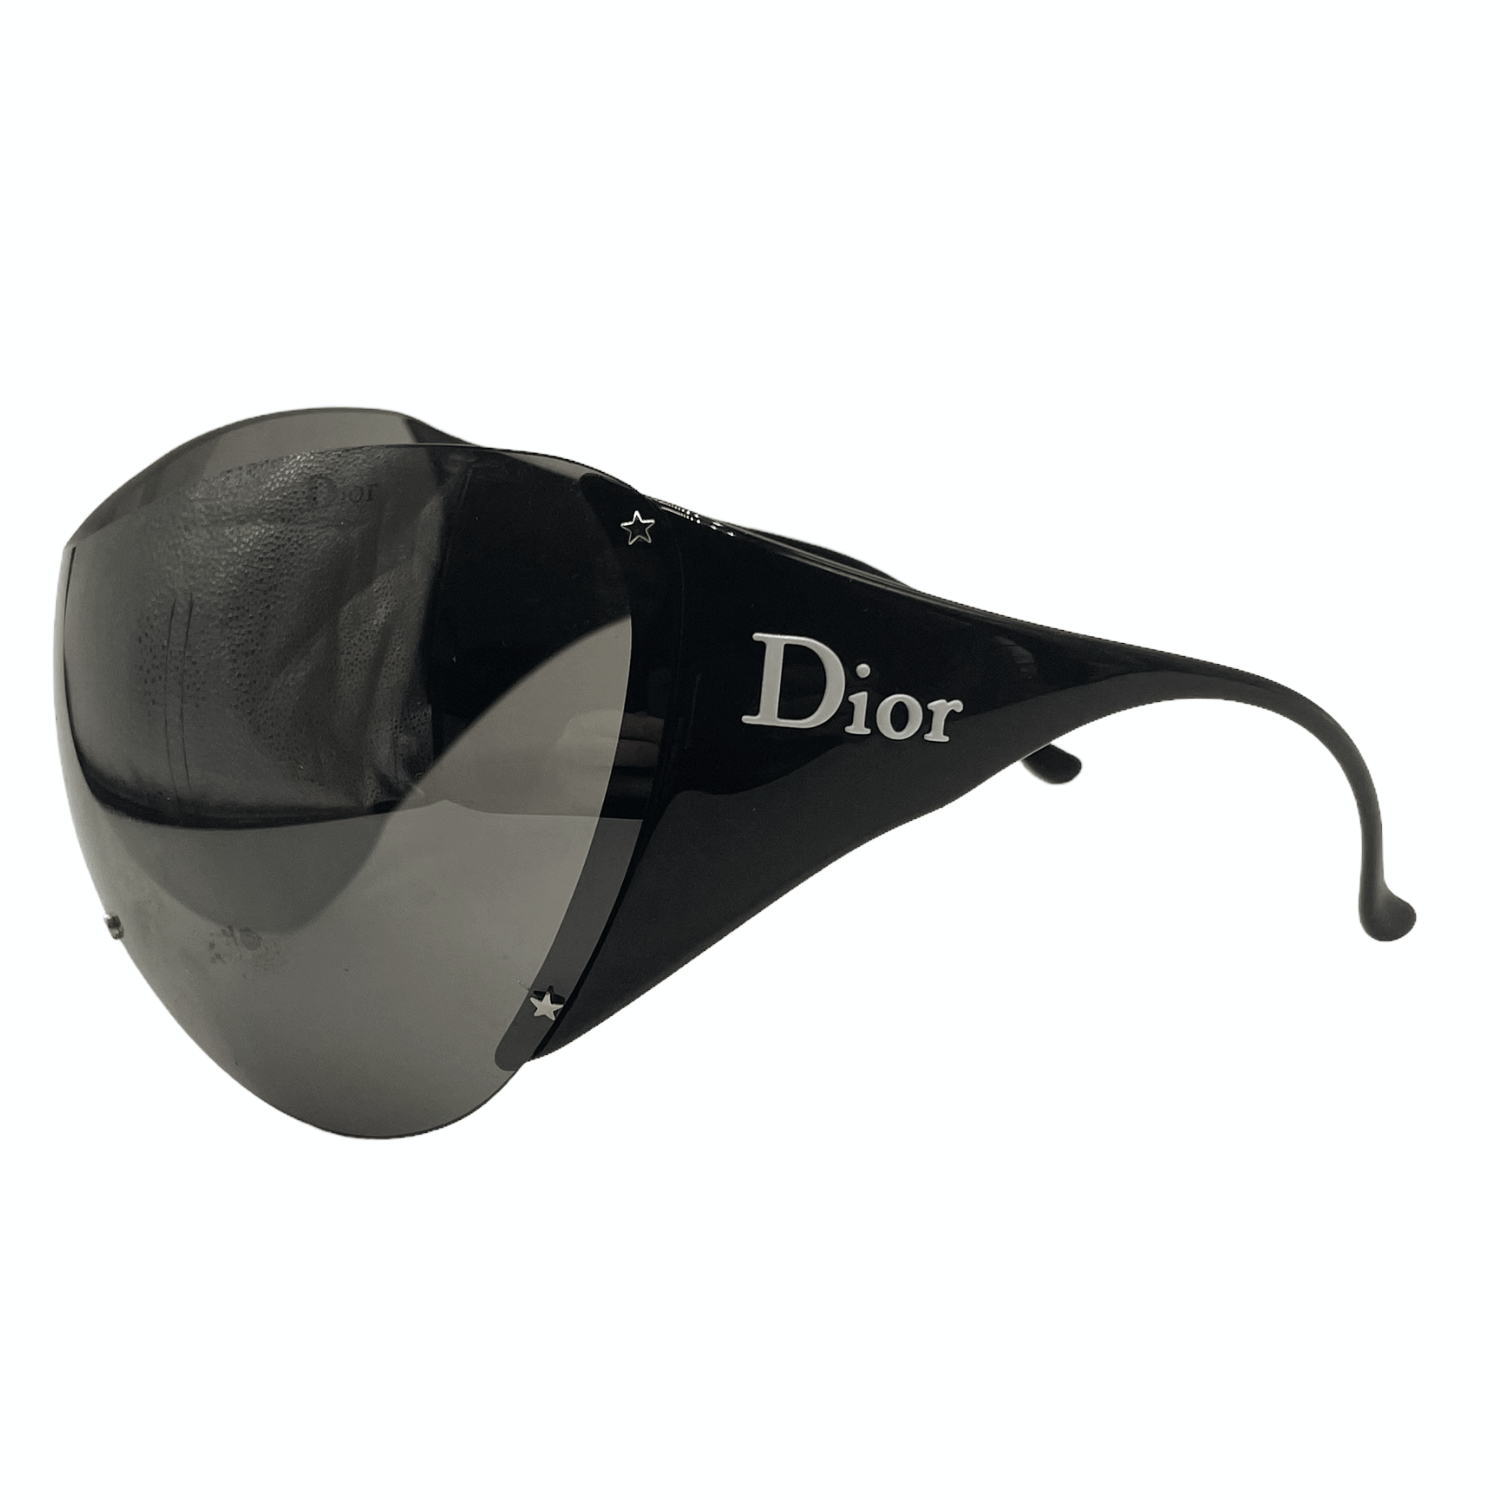 Dior - Piccadilly 2 Cannage Aviator Sunglasses Gold | www.luxurybags.eu